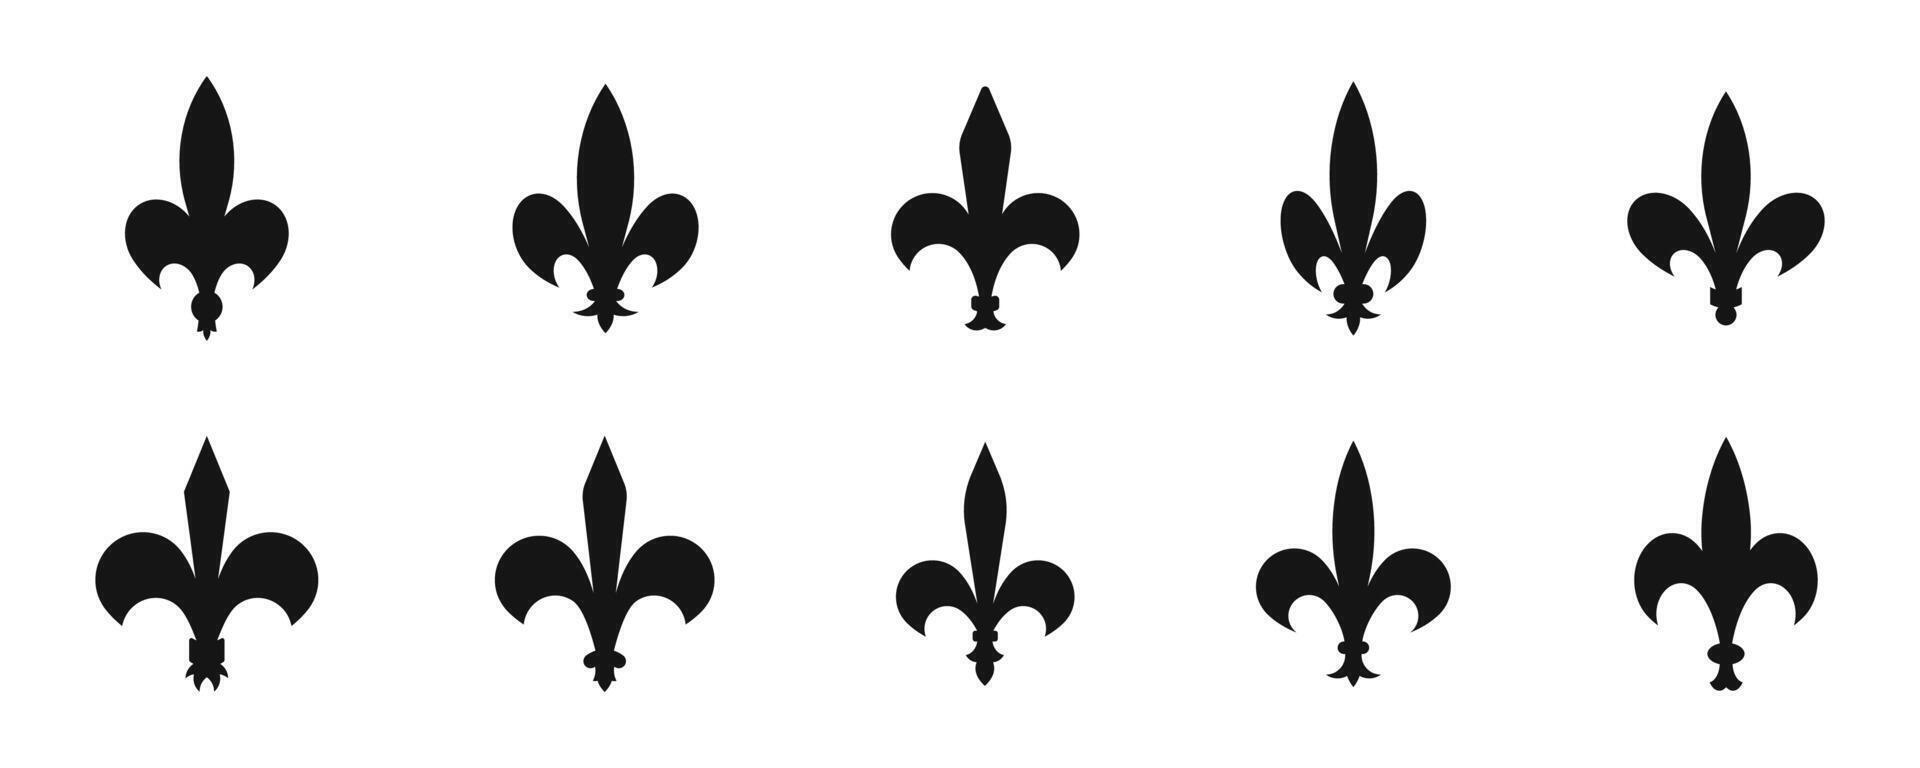 Fleur-De-Lis icon collection. Heraldic lily icons. Silhouette style icons. vector